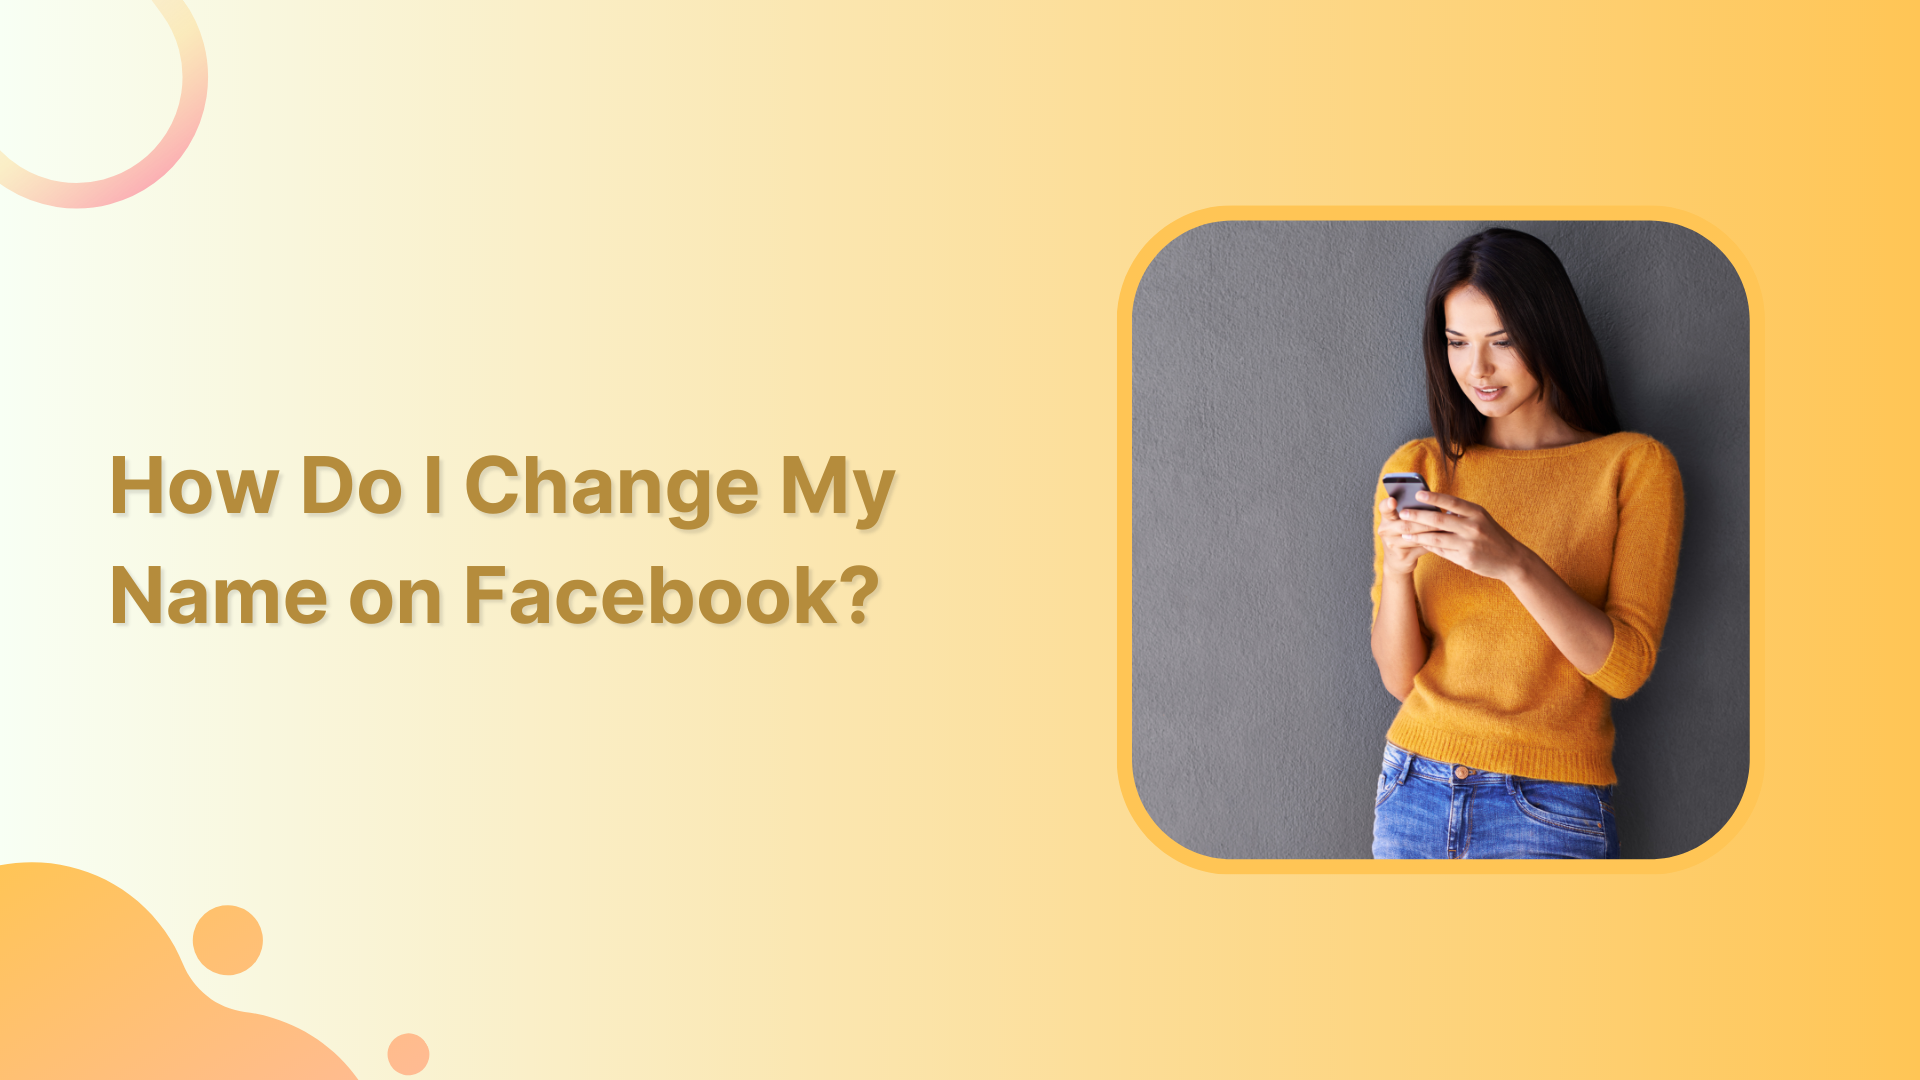 How Do I Change My Name on Facebook?